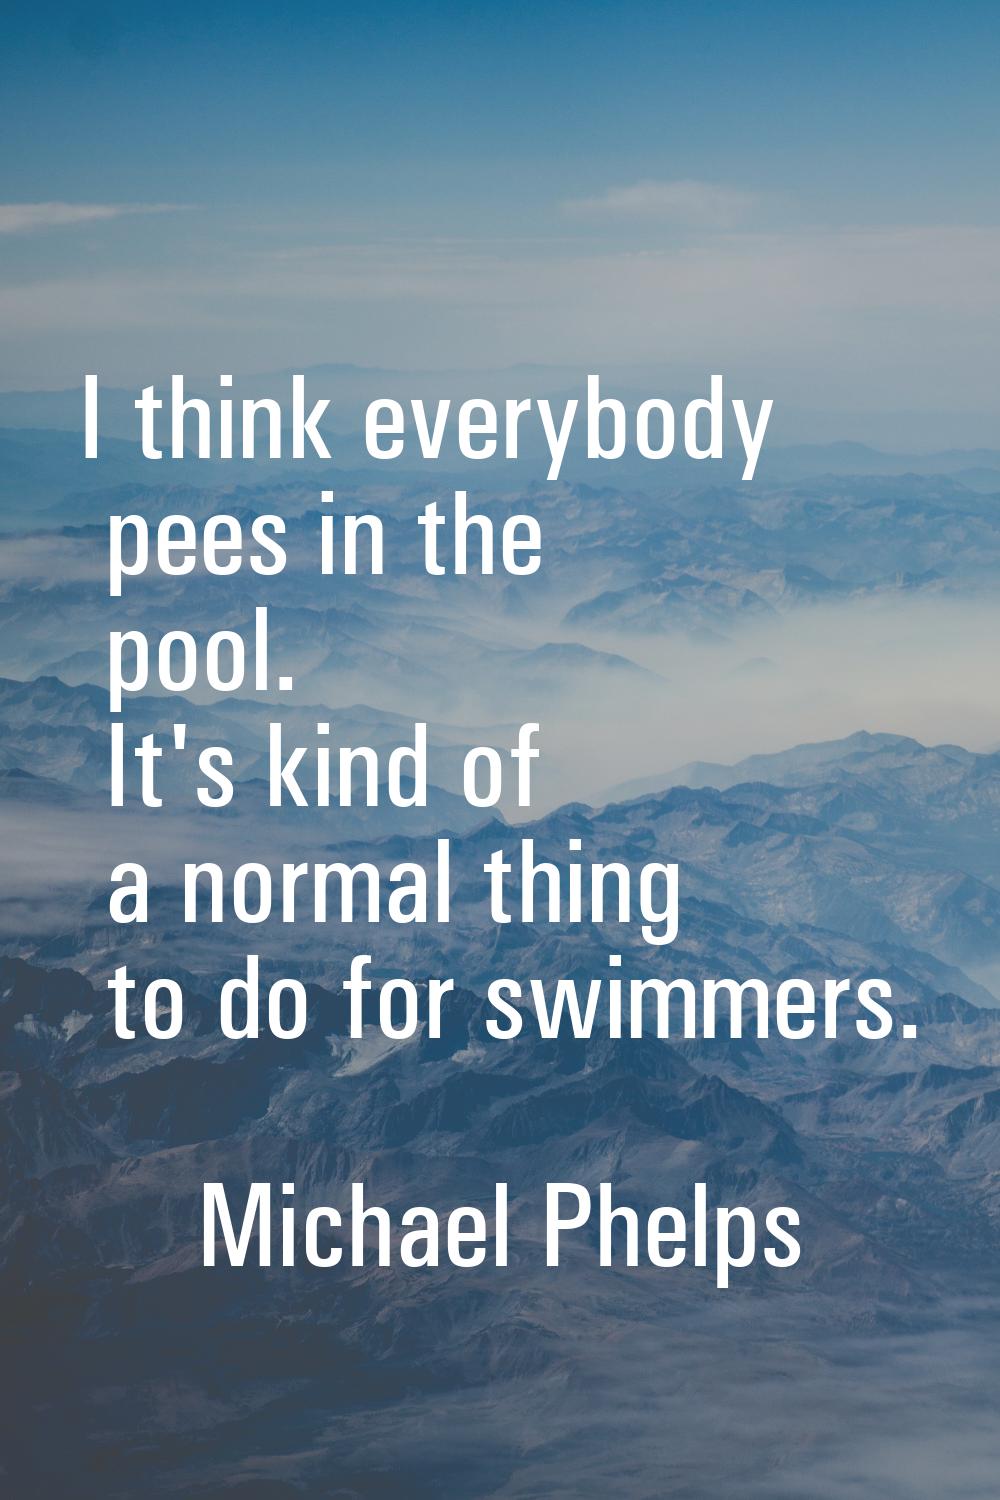 I think everybody pees in the pool. It's kind of a normal thing to do for swimmers.